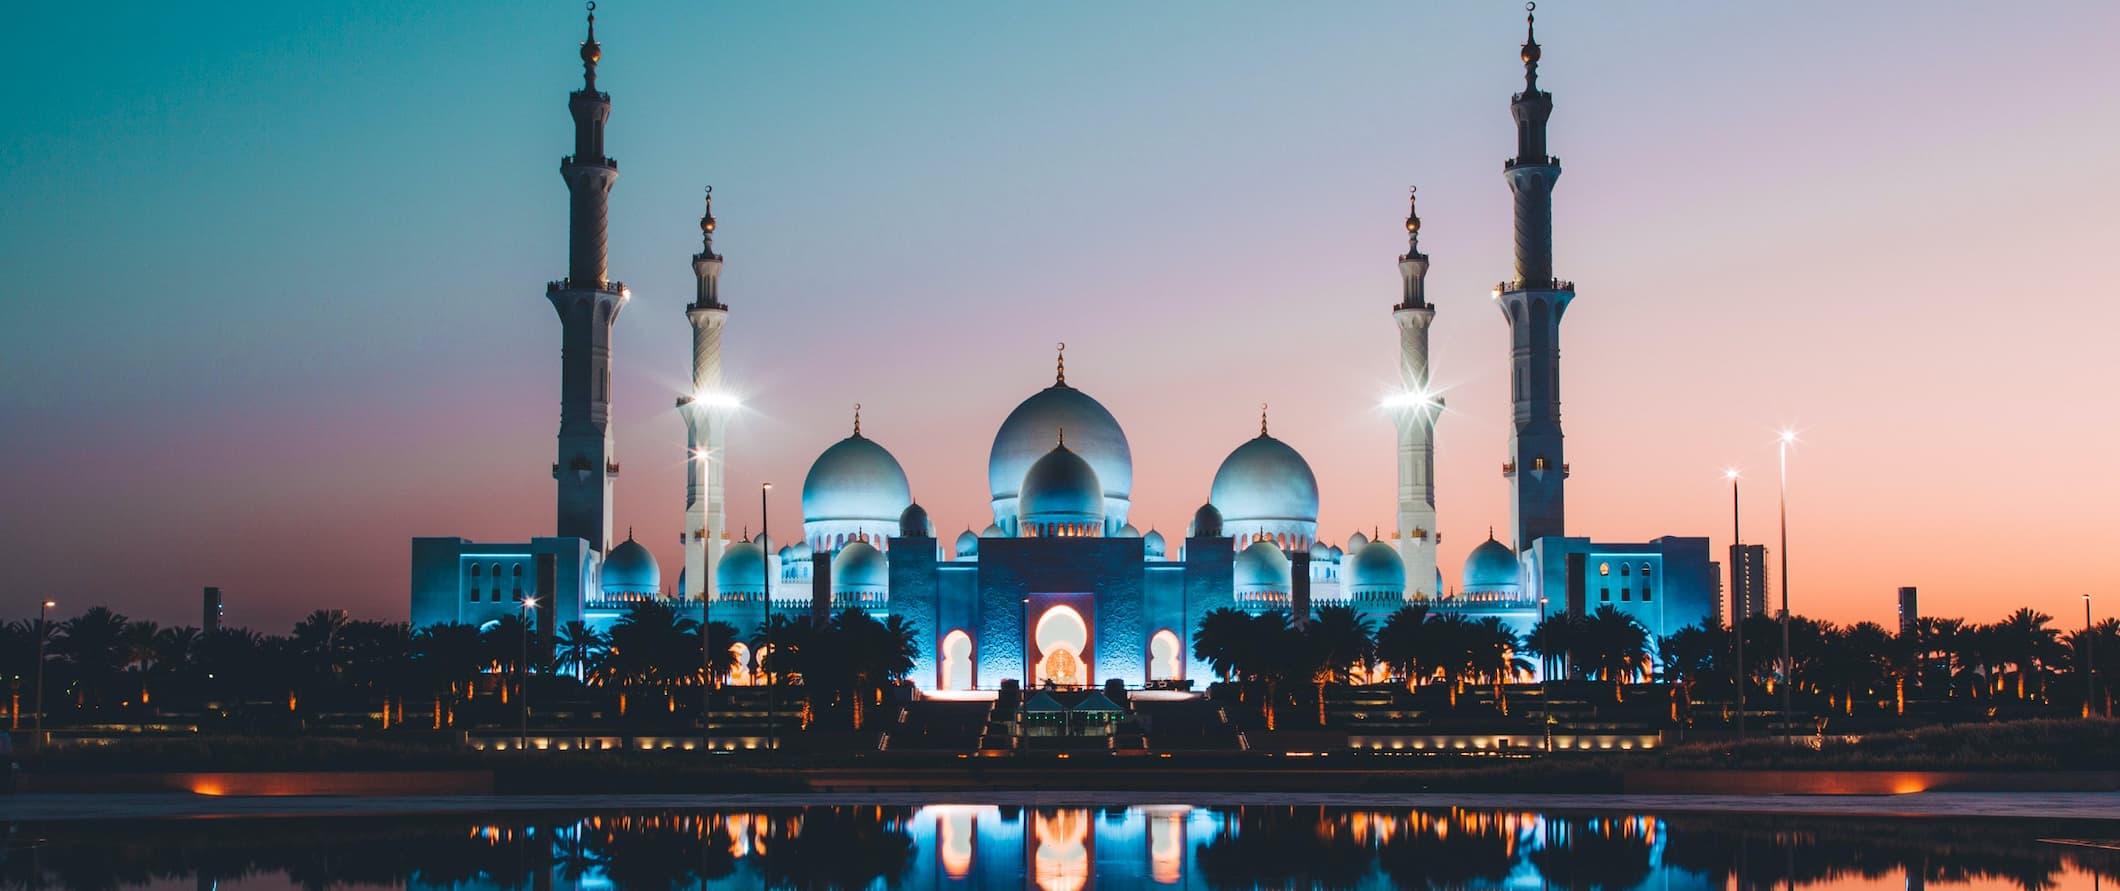 A huge mosque lit up at night near the water of Dubai